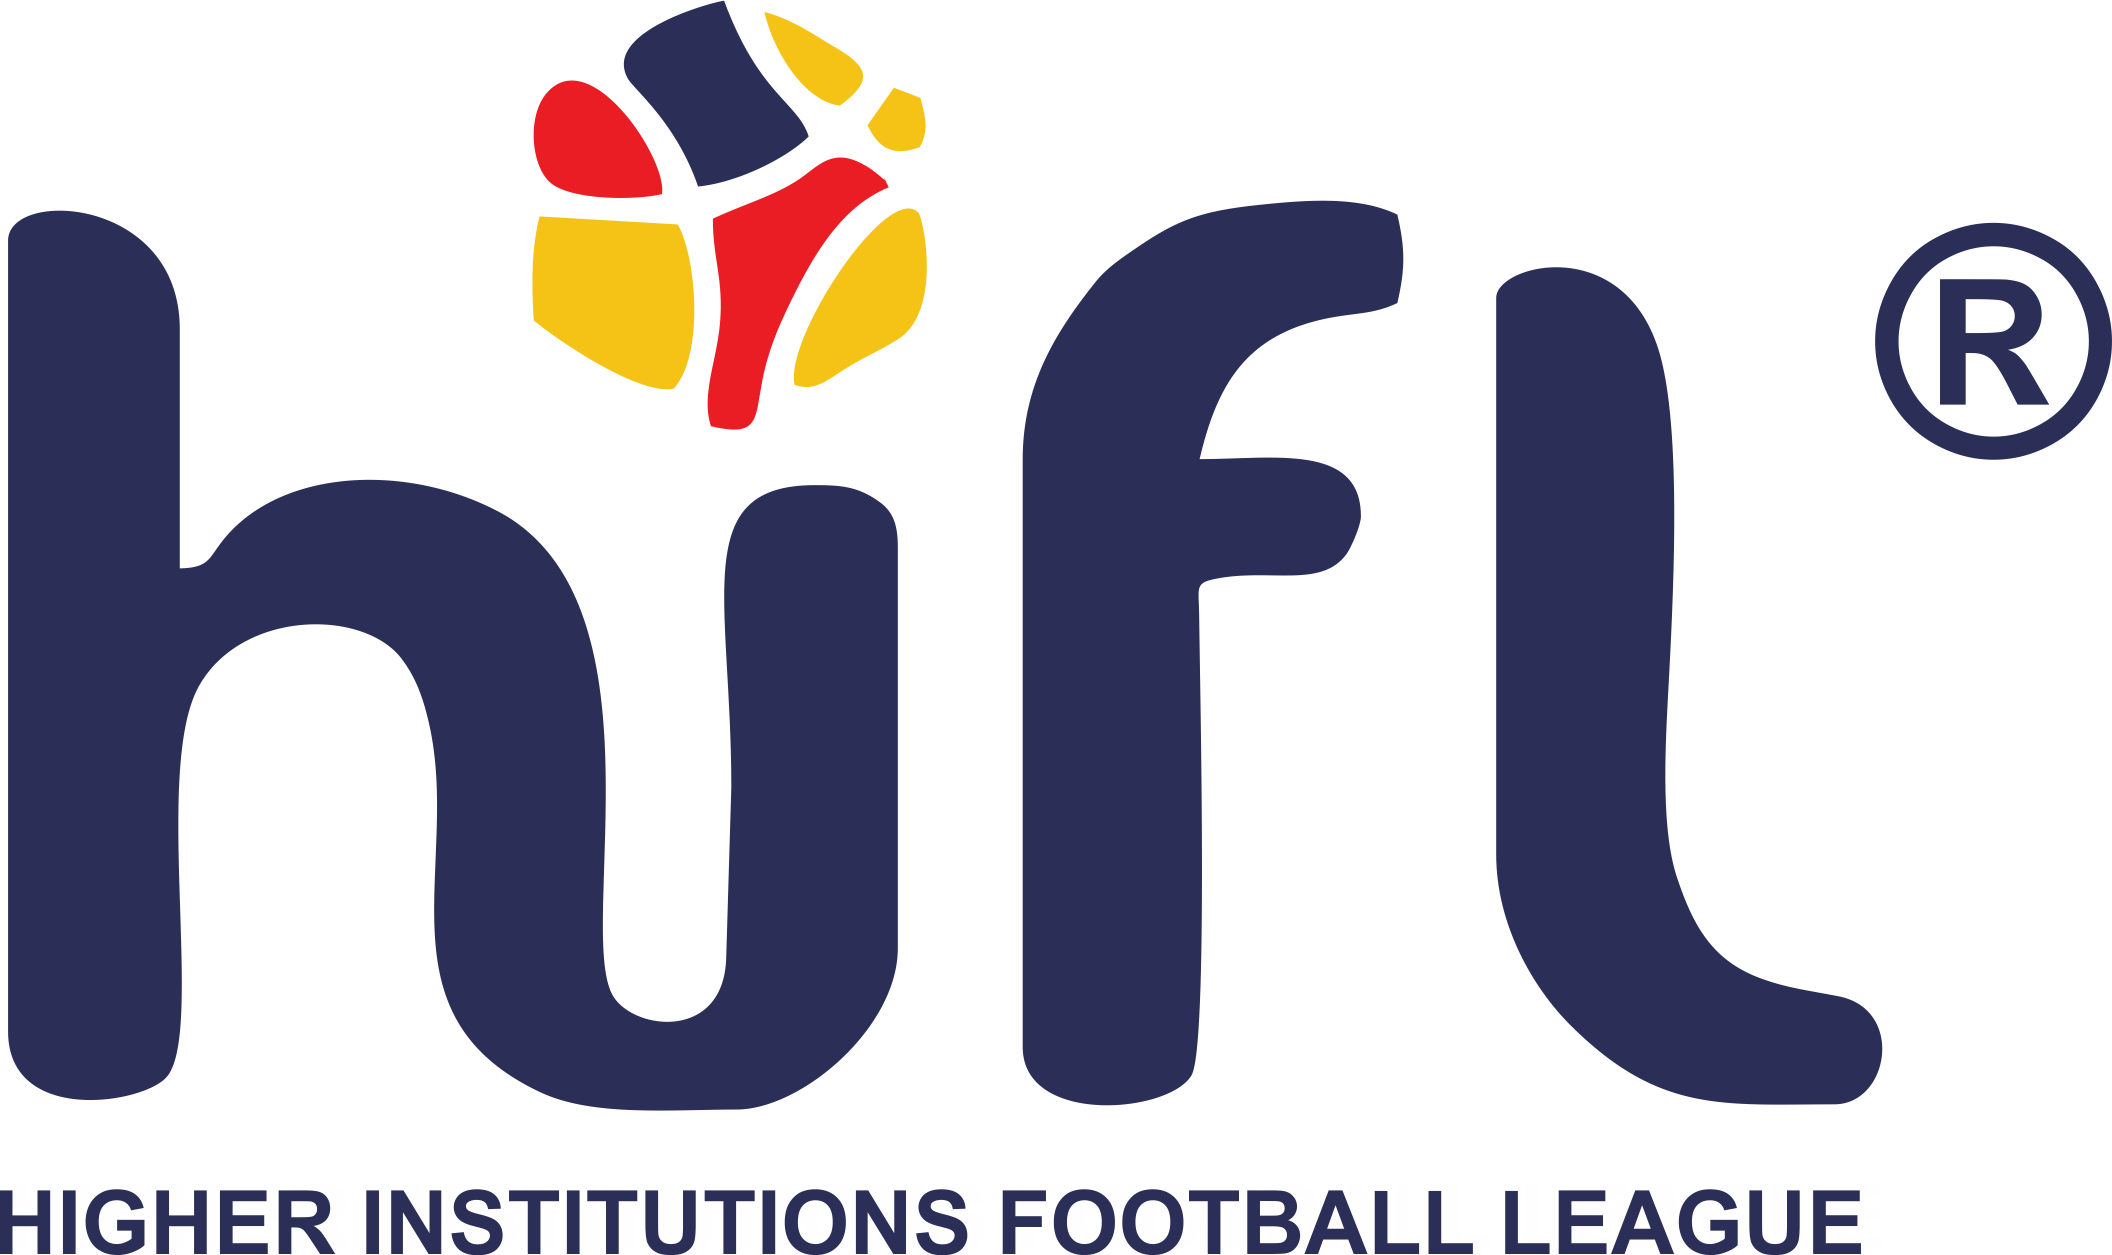 Higher Institutions Football League (2112x1255)